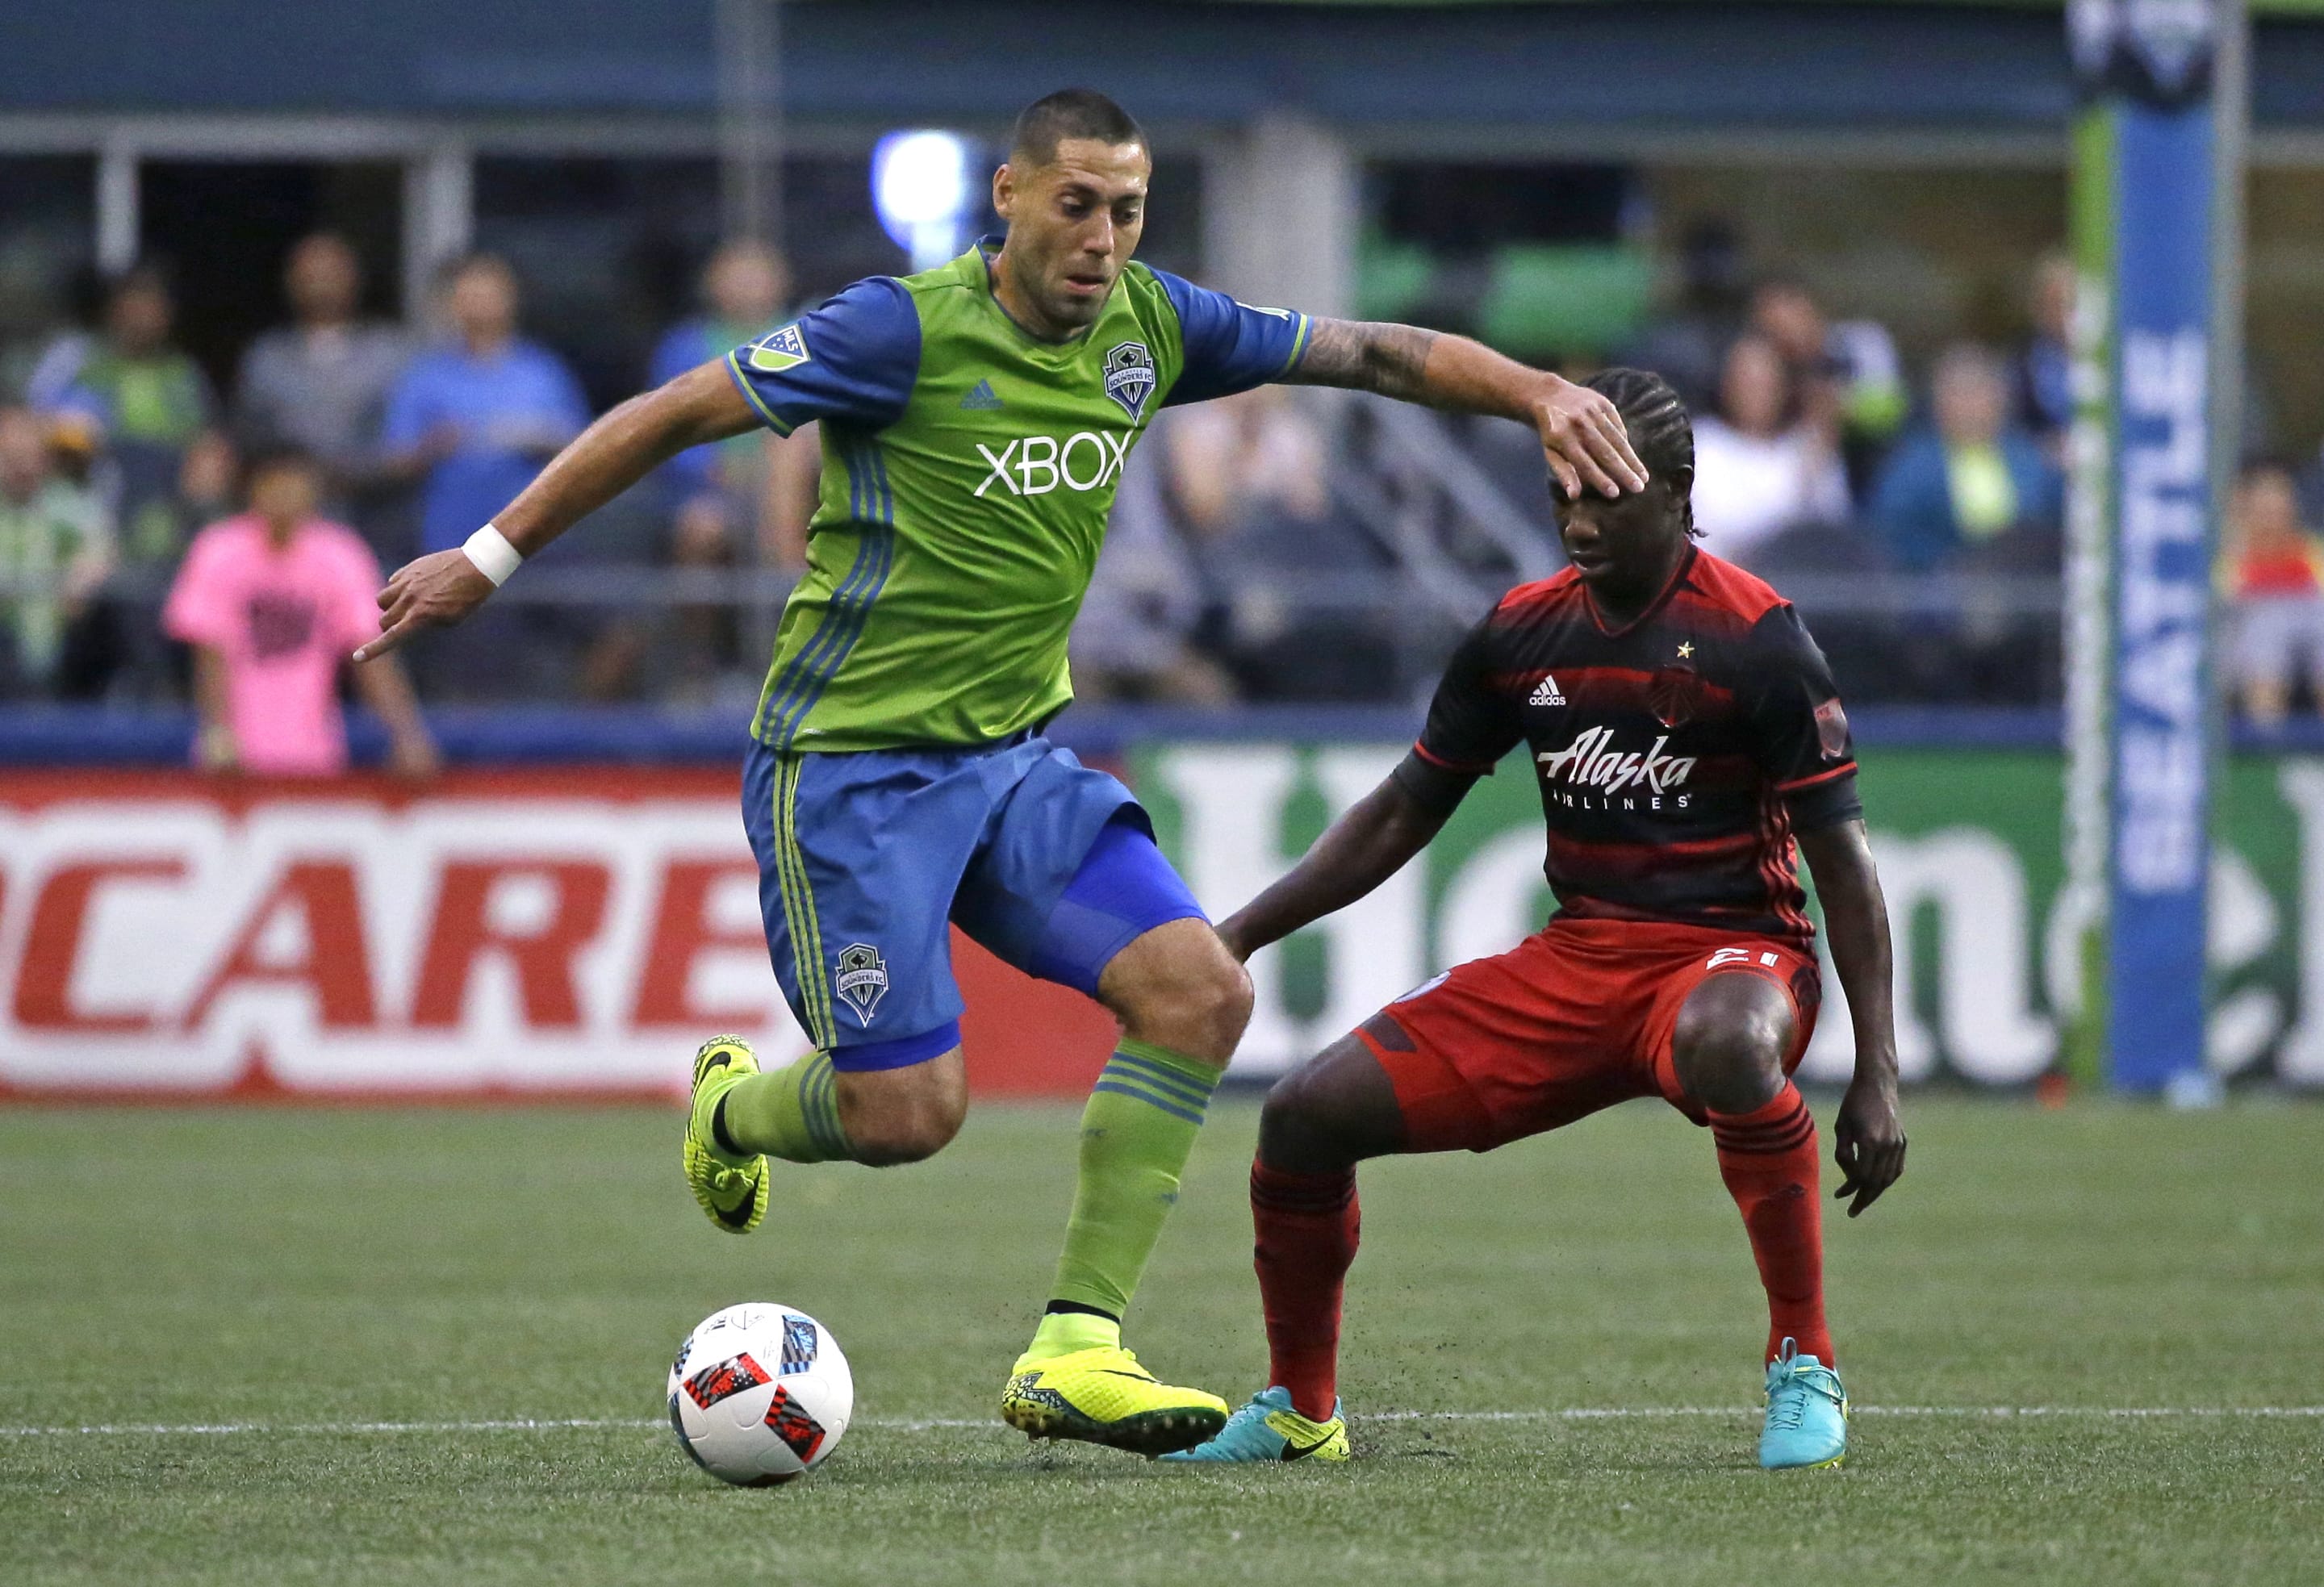 Seattle Sounders forward Clint Dempsey, left, moves the ball around Portland Timbers midfielder Diego Chara, right, in the first half of an MLS soccer match, Sunday, Aug. 21, 2016, in Seattle. (AP Photo/Ted S.